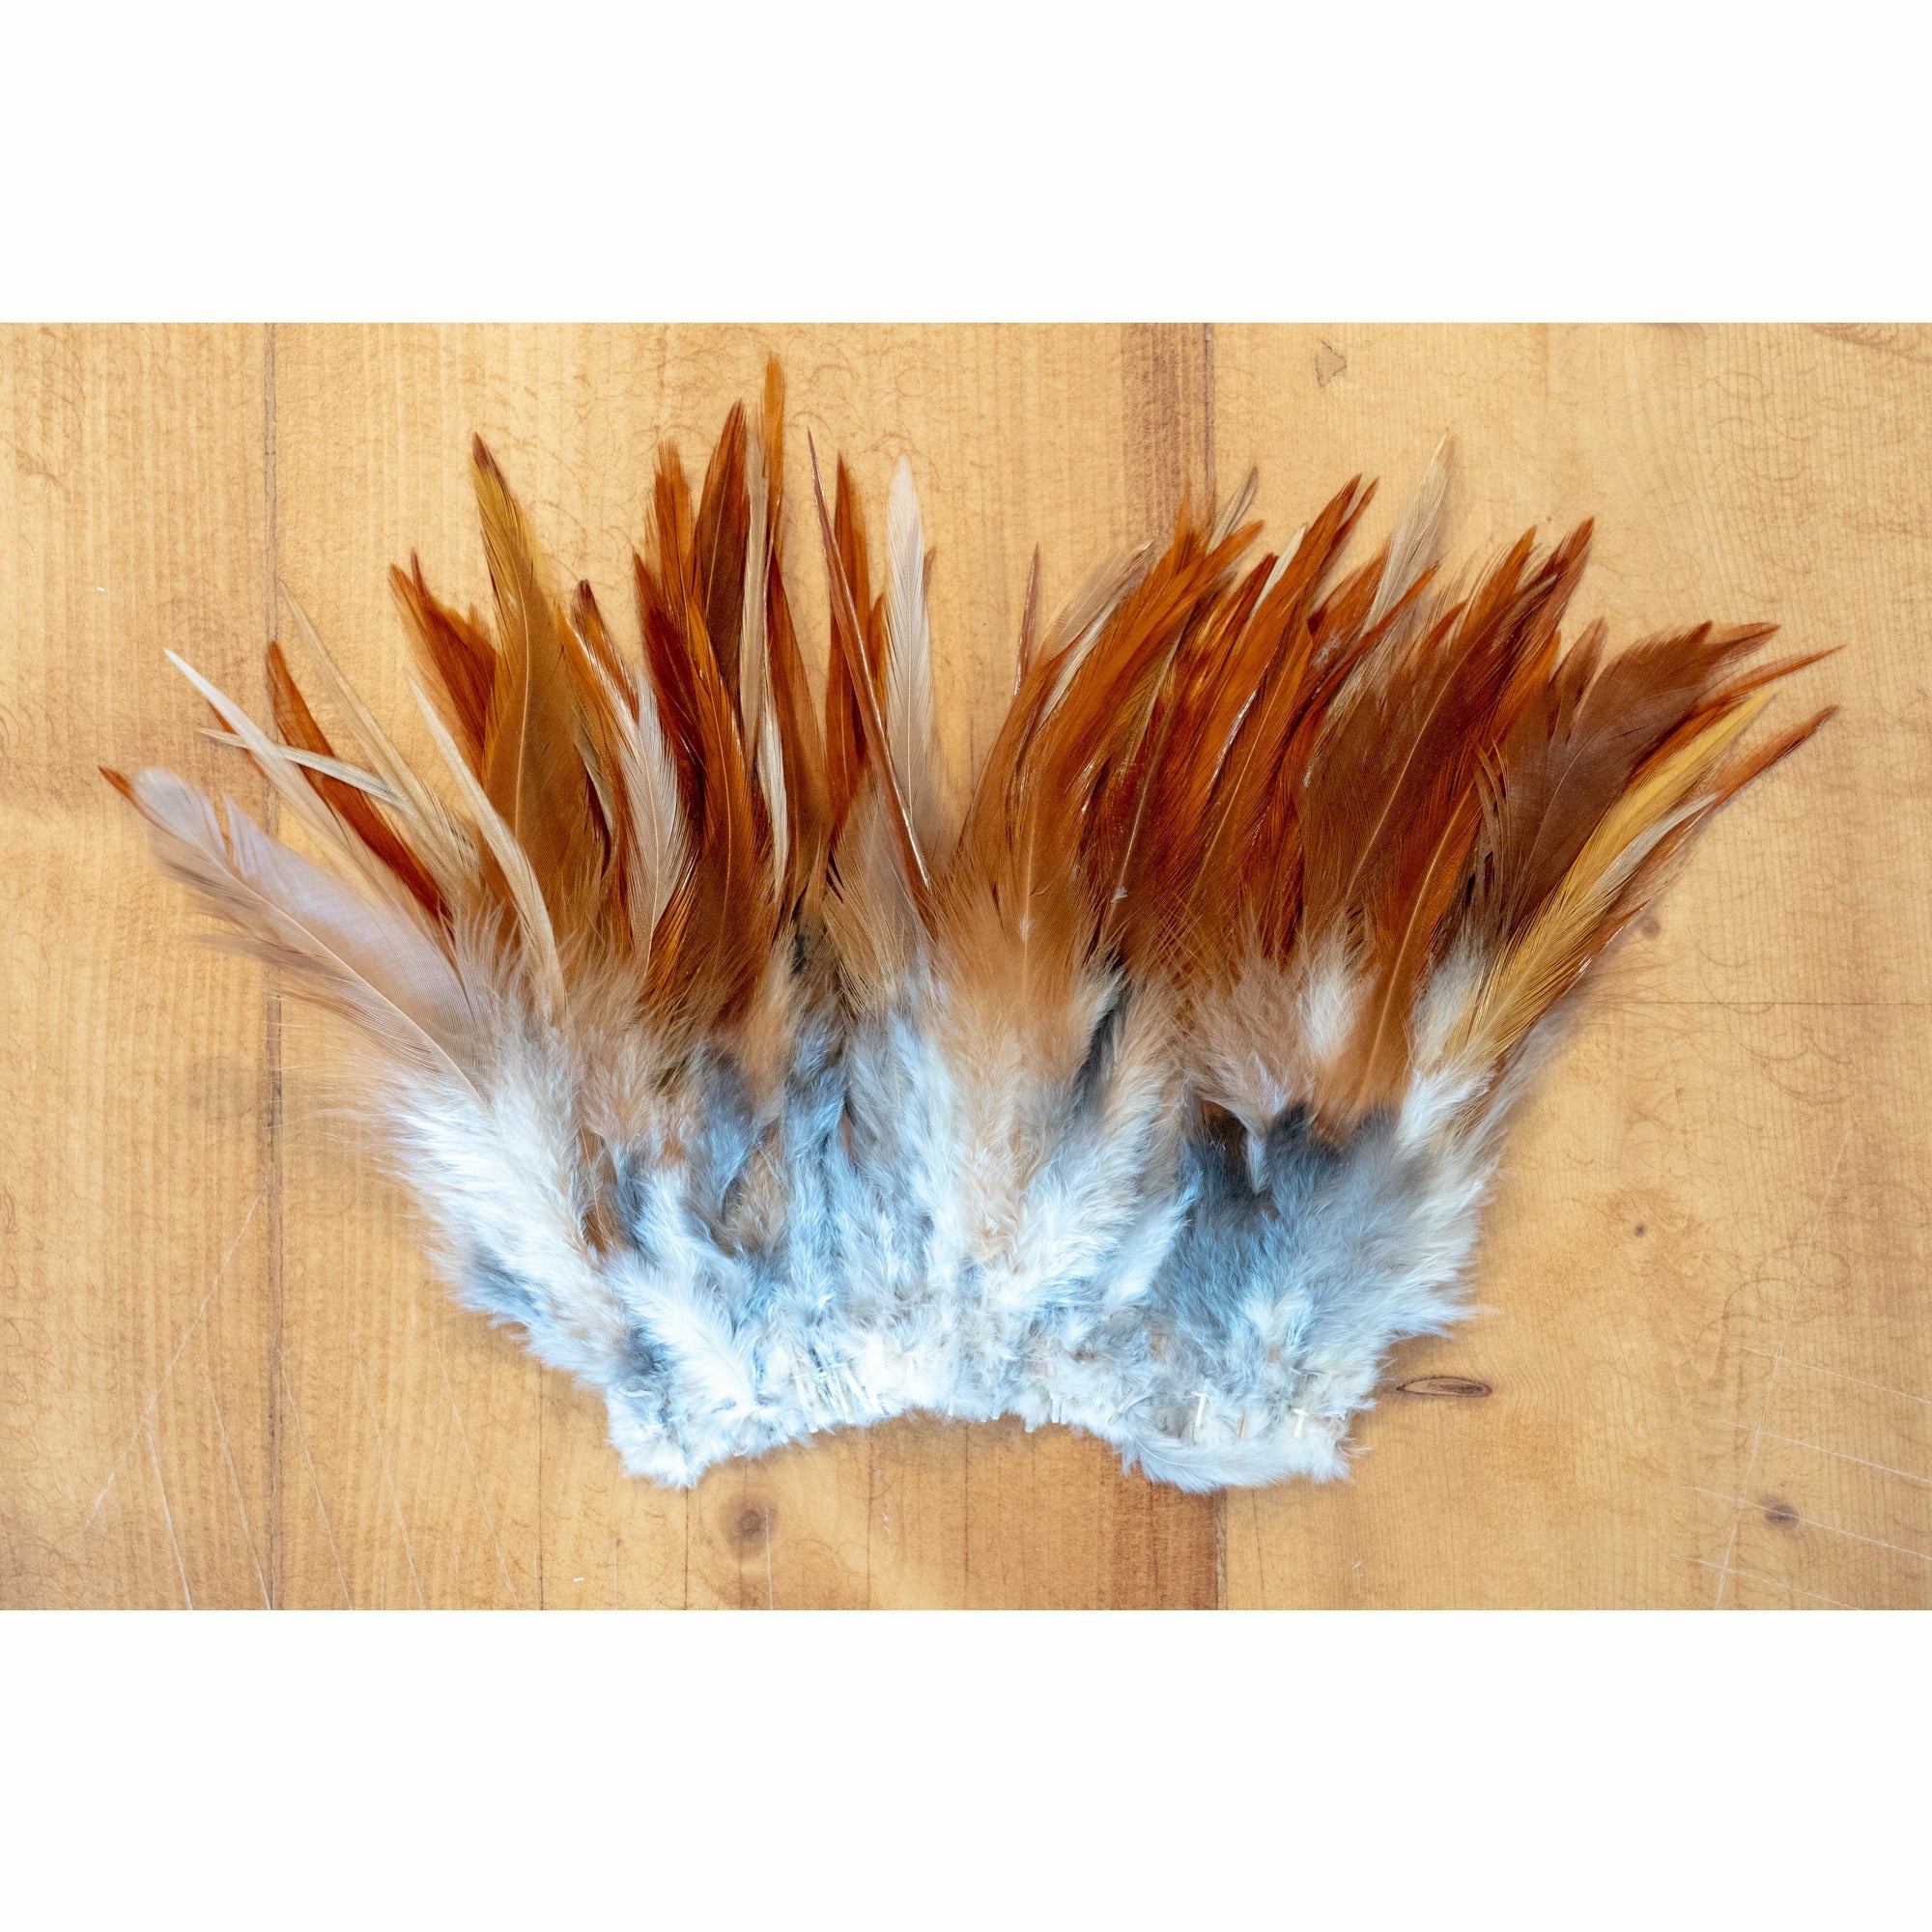 Strung Rooster Saddles (Long) - All Colors